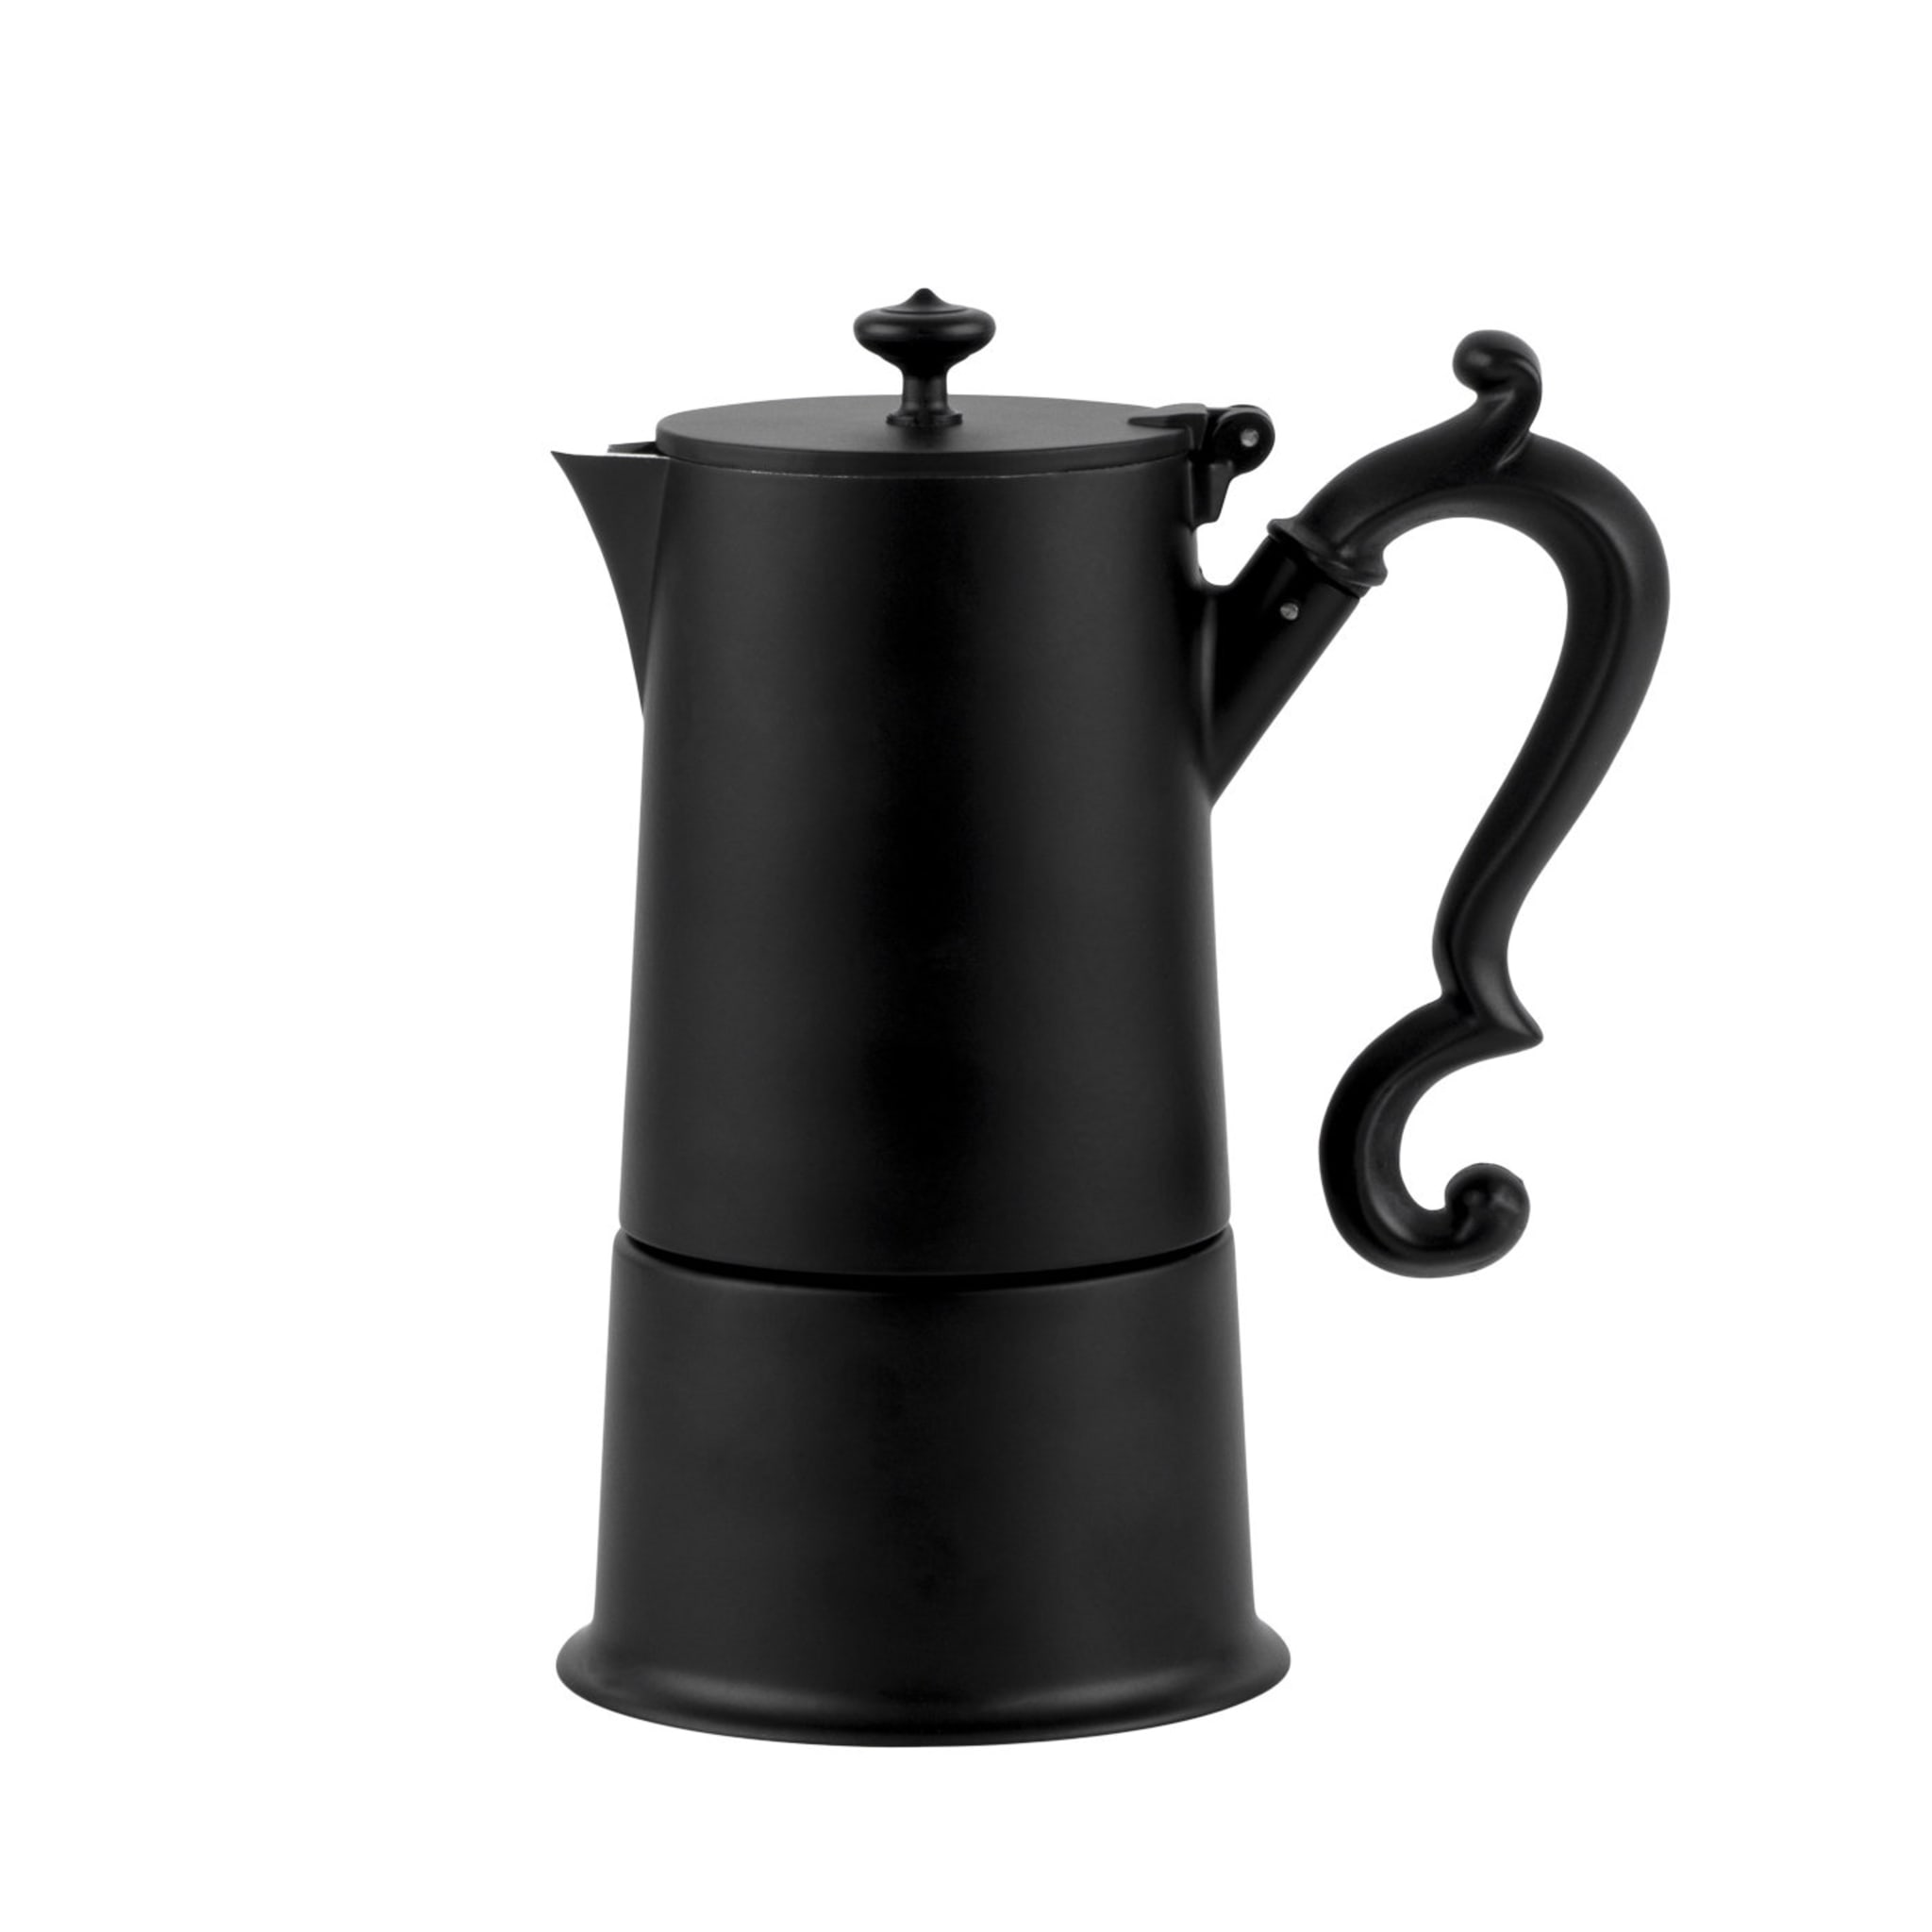 Lady Anne Coffee Maker by Lara Caffi - Main view